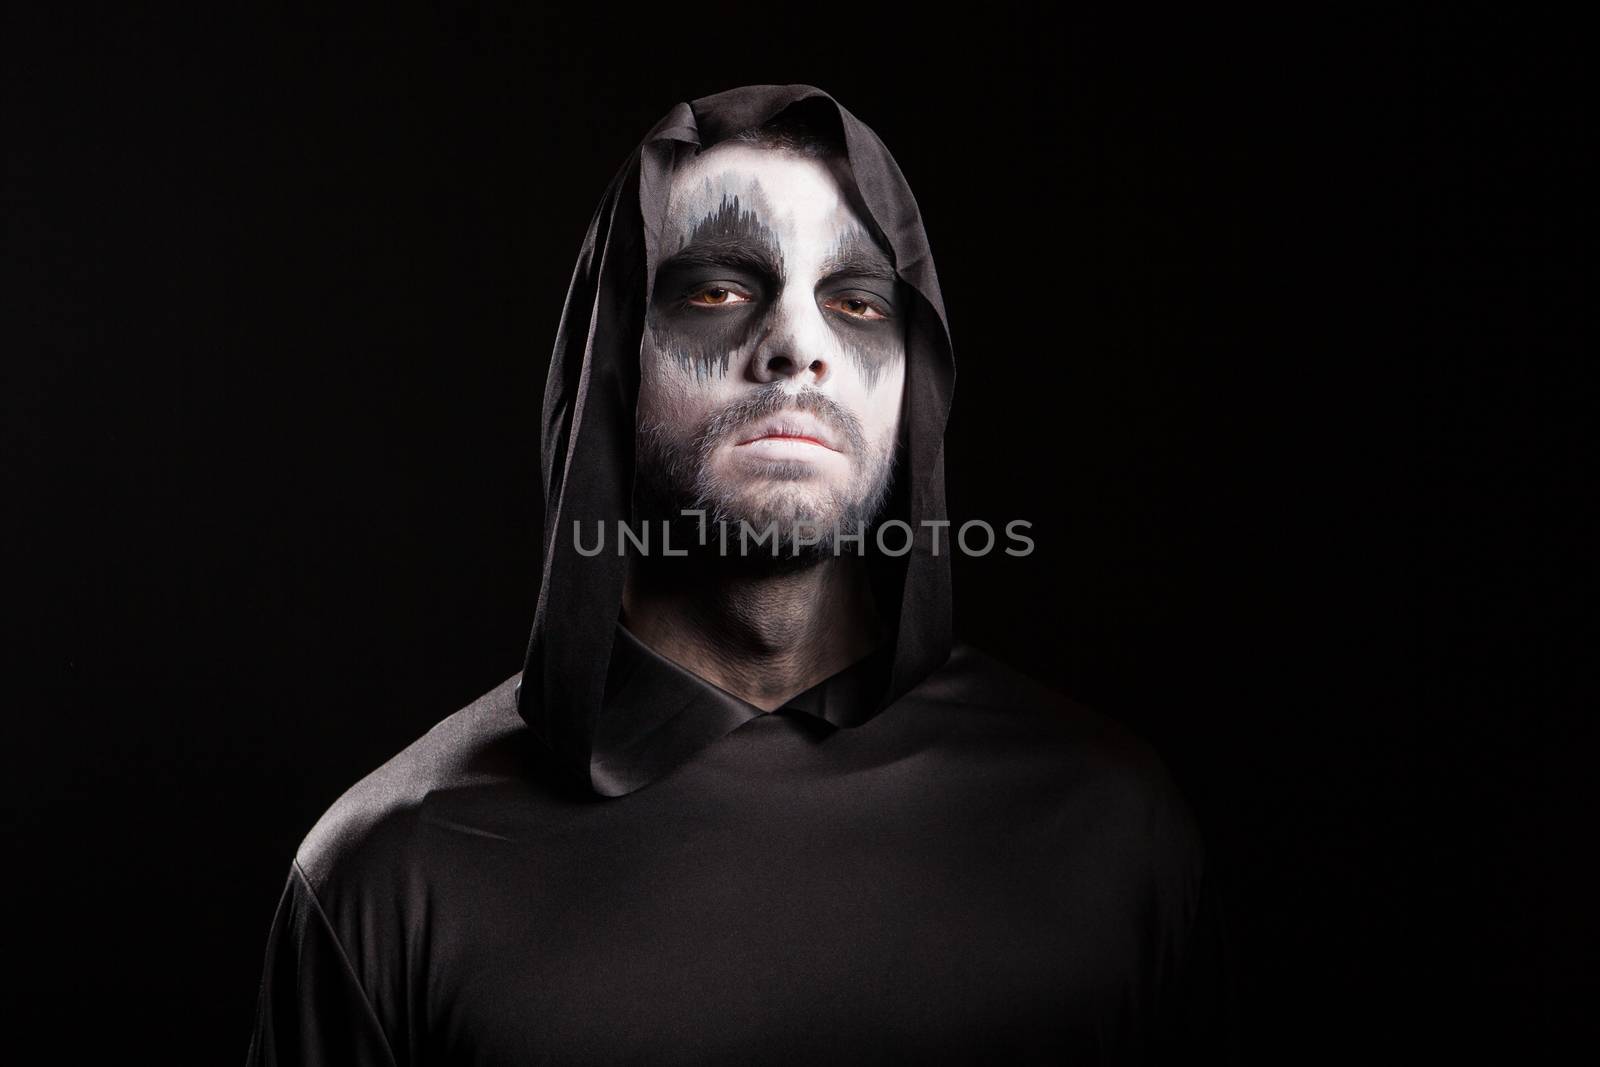 Man with creepy face dressed up like grim reaper over black background.